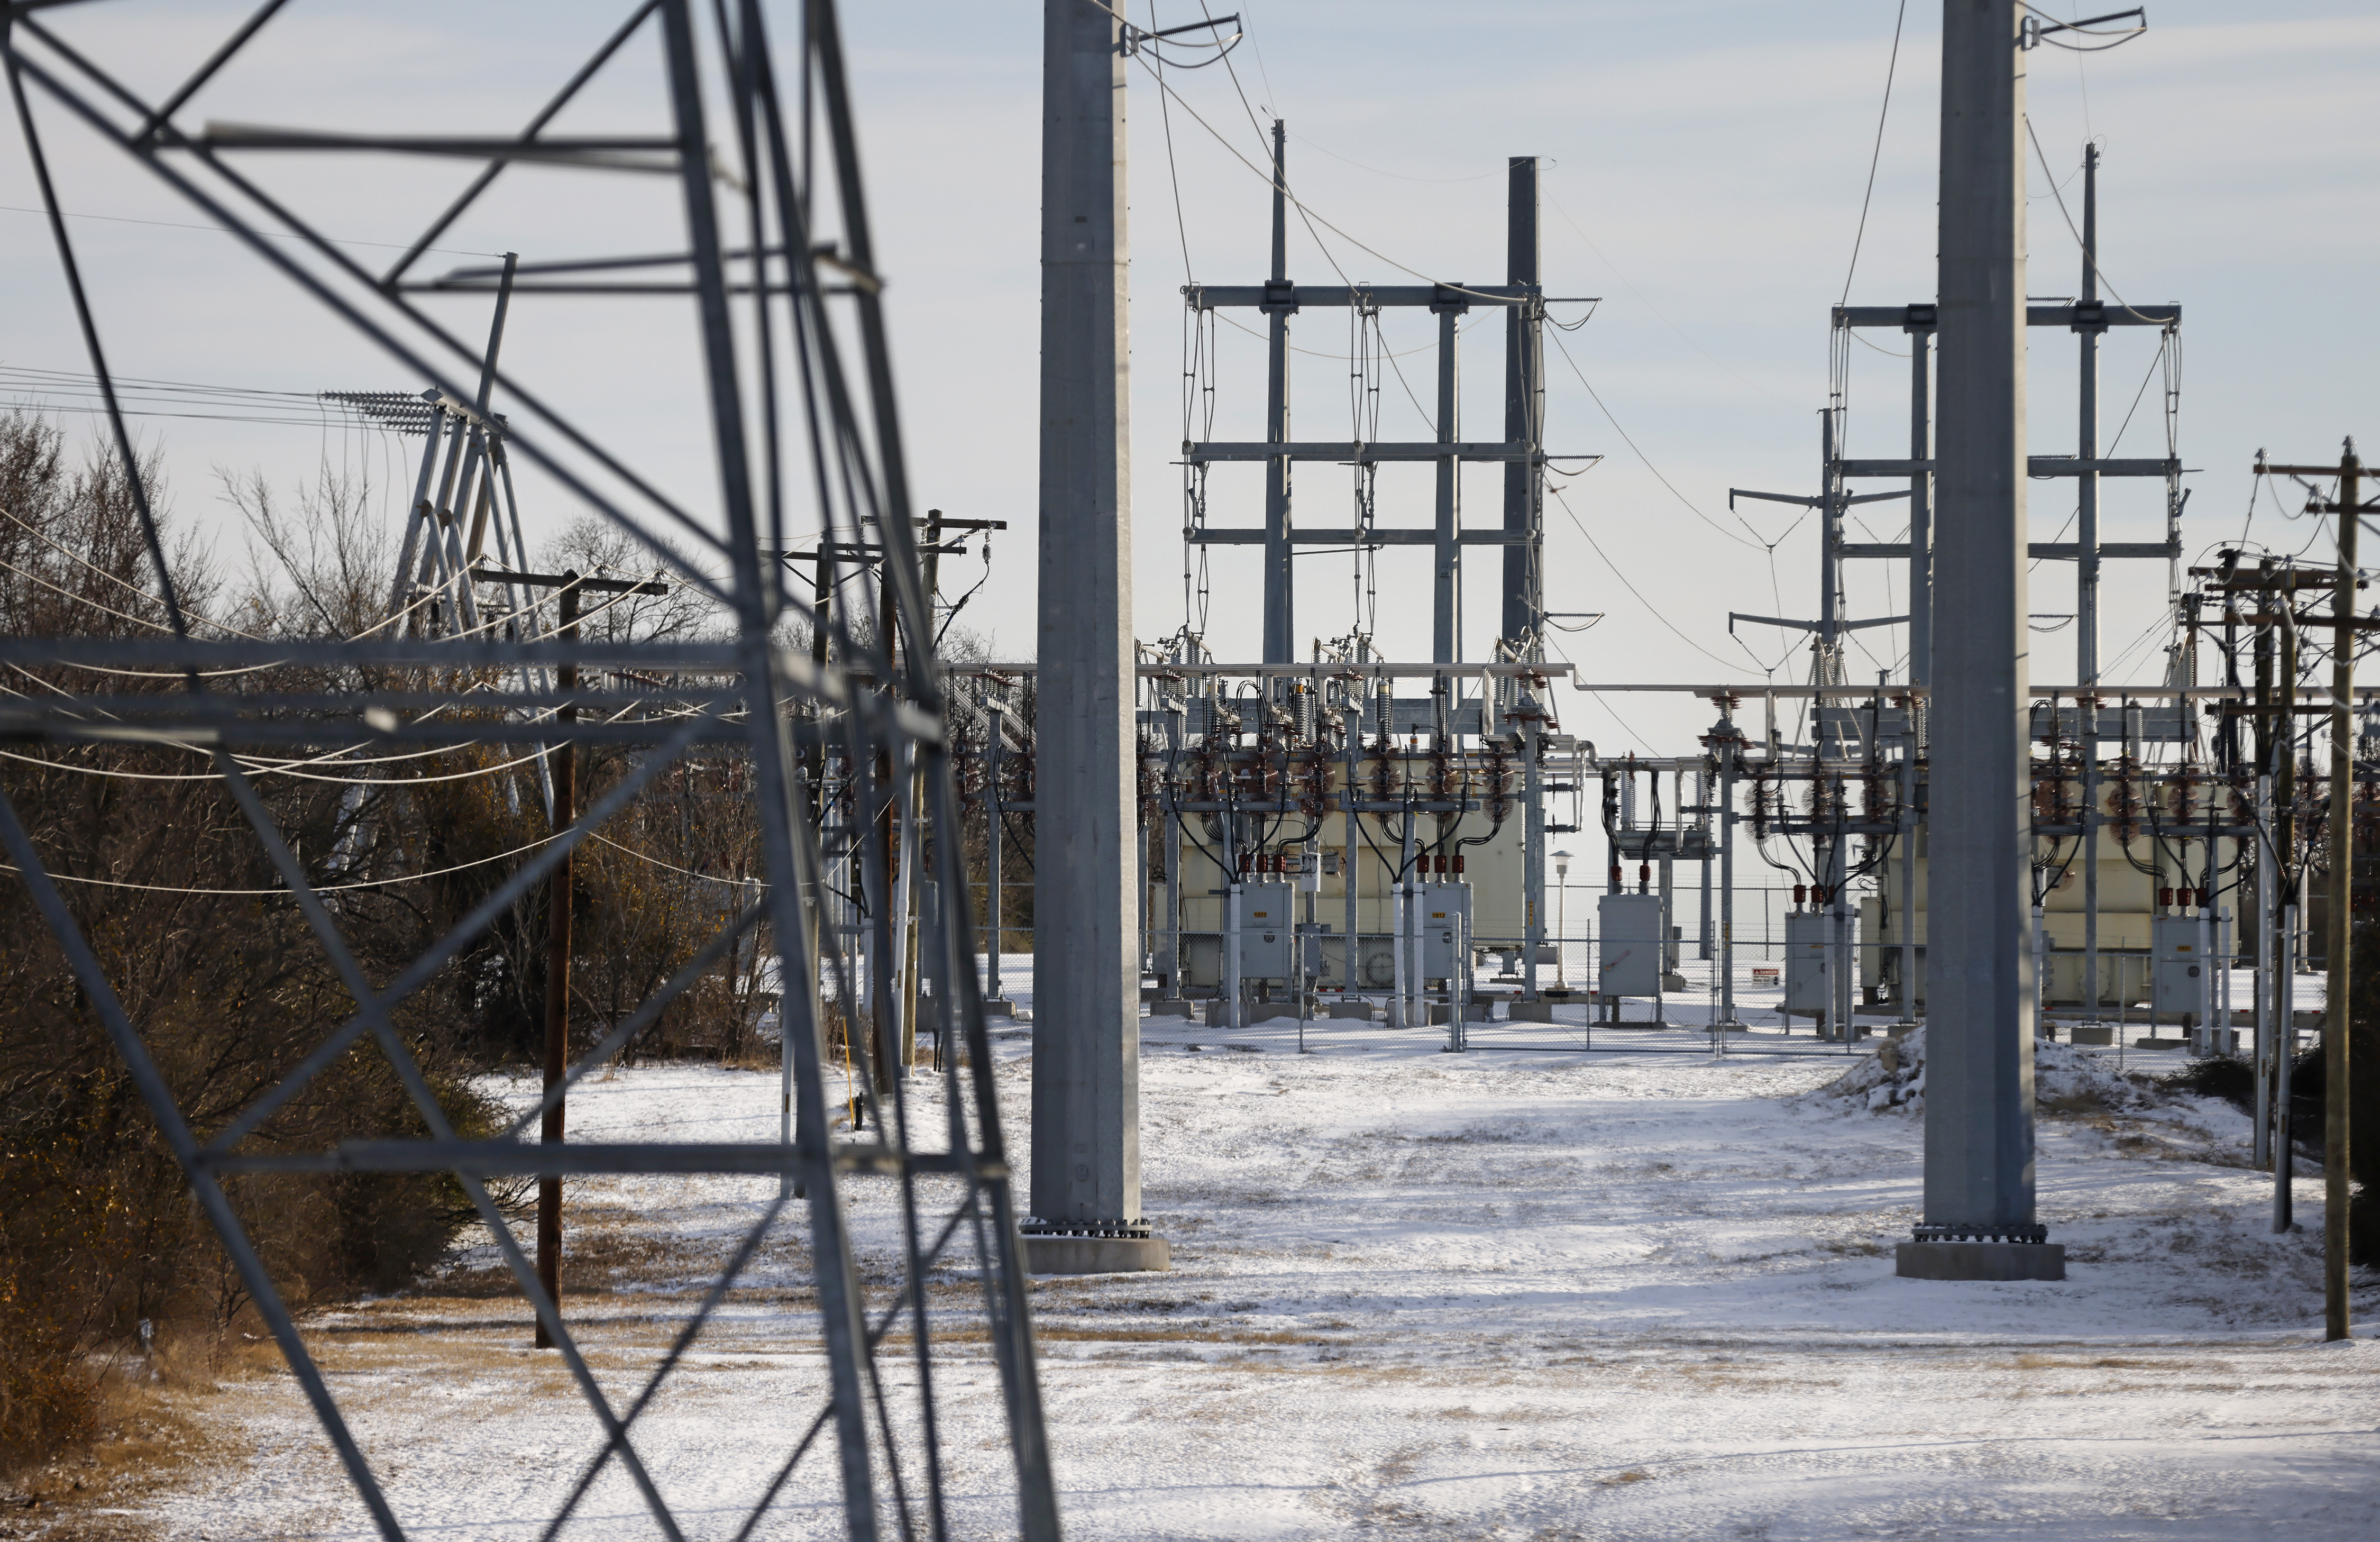 Transmission towers and power lines lead to a substation after a snow storm on February 16, 2021 in Fort Worth, Texas. (Ron Jenkins/Getty Images)